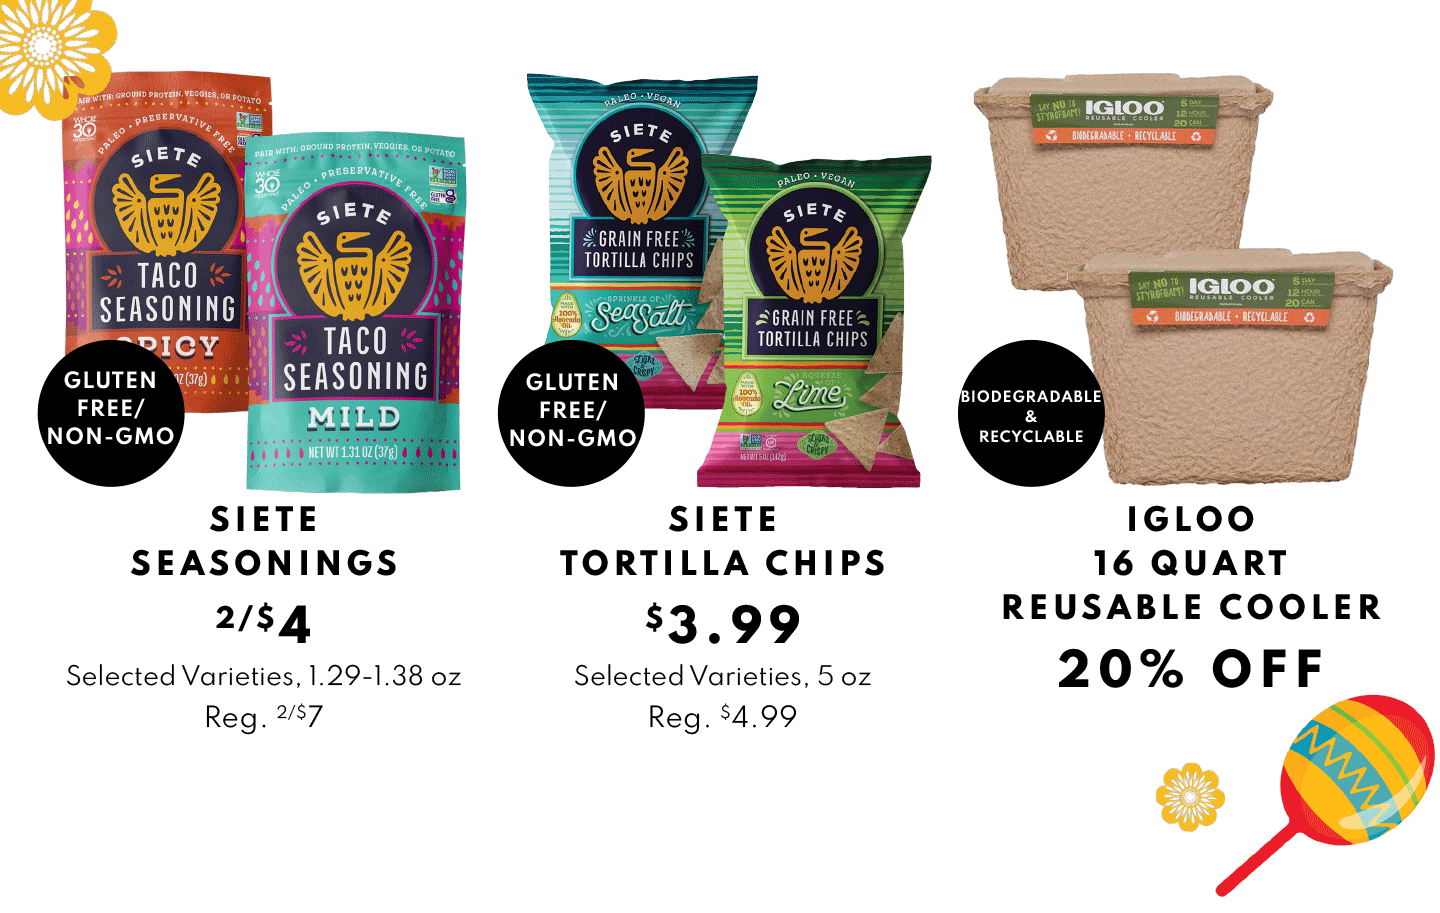 Siete Seasonings 2/$4, Siete Tortilla Chips $3.99 and Igloo 16 Qt Reusable Cooler 20% OFF